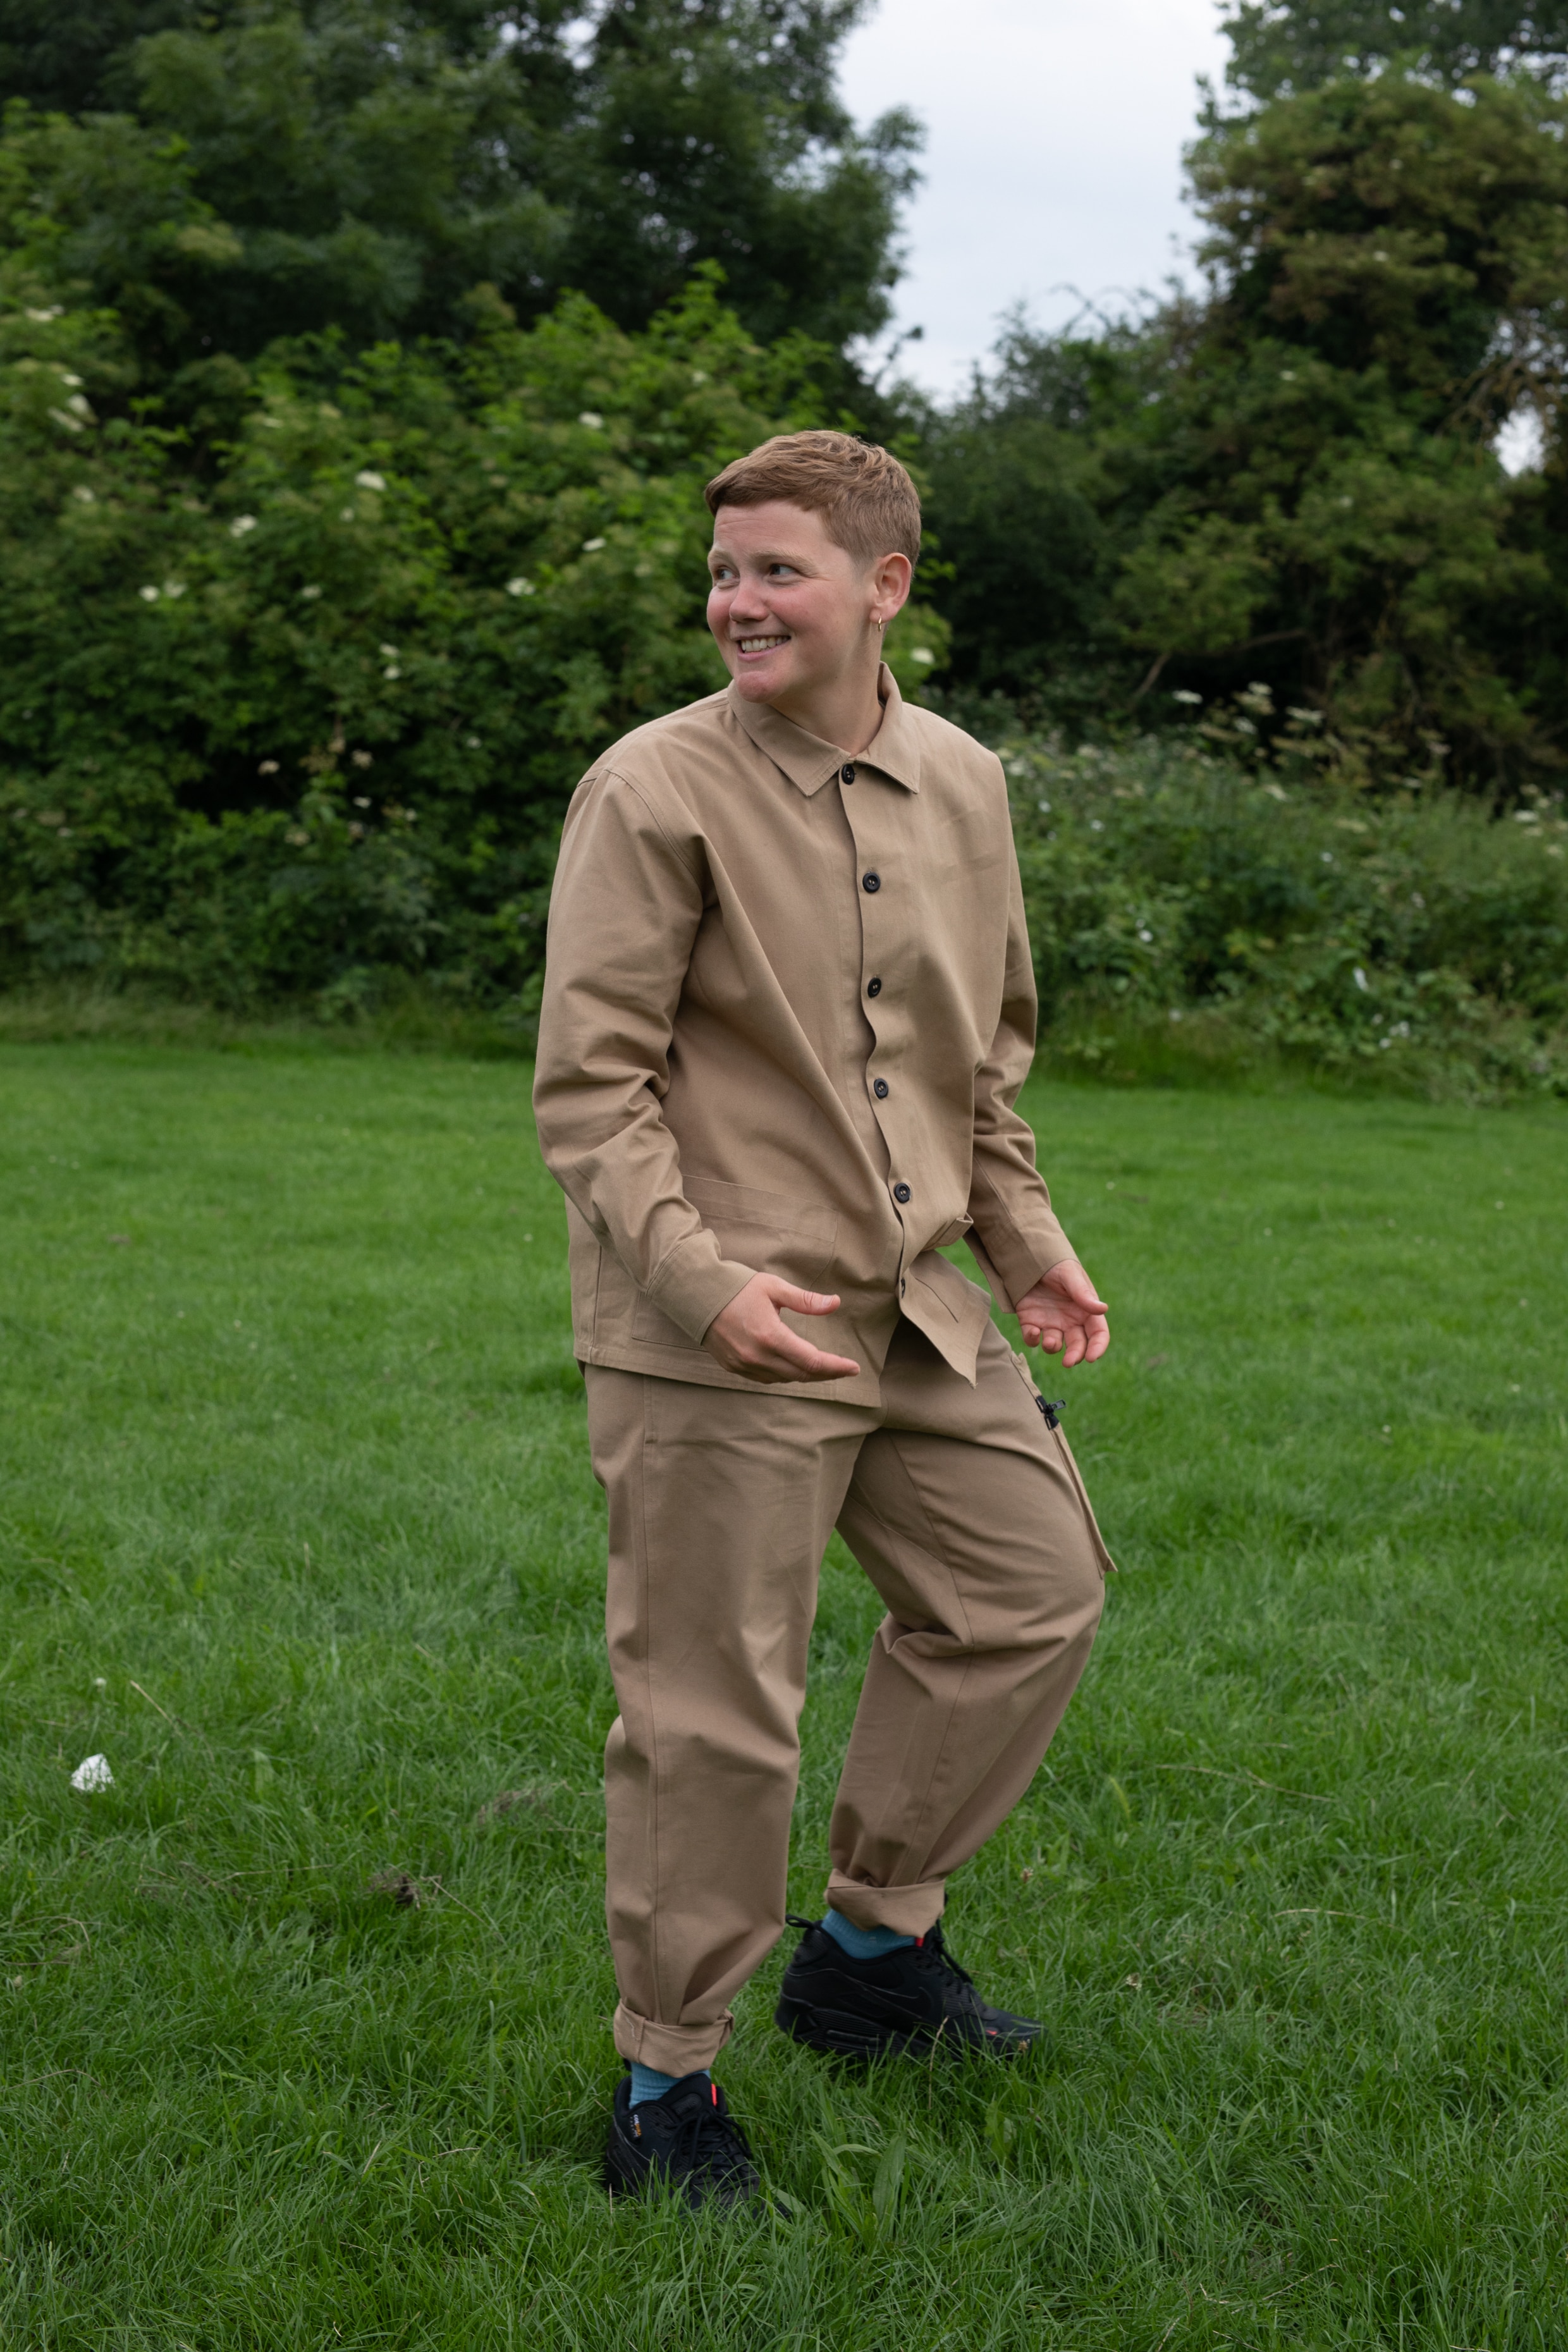 A white non-binary person with short sandy hair wears a long-sleeved khaki shirt and pants in a luscious grassy park.